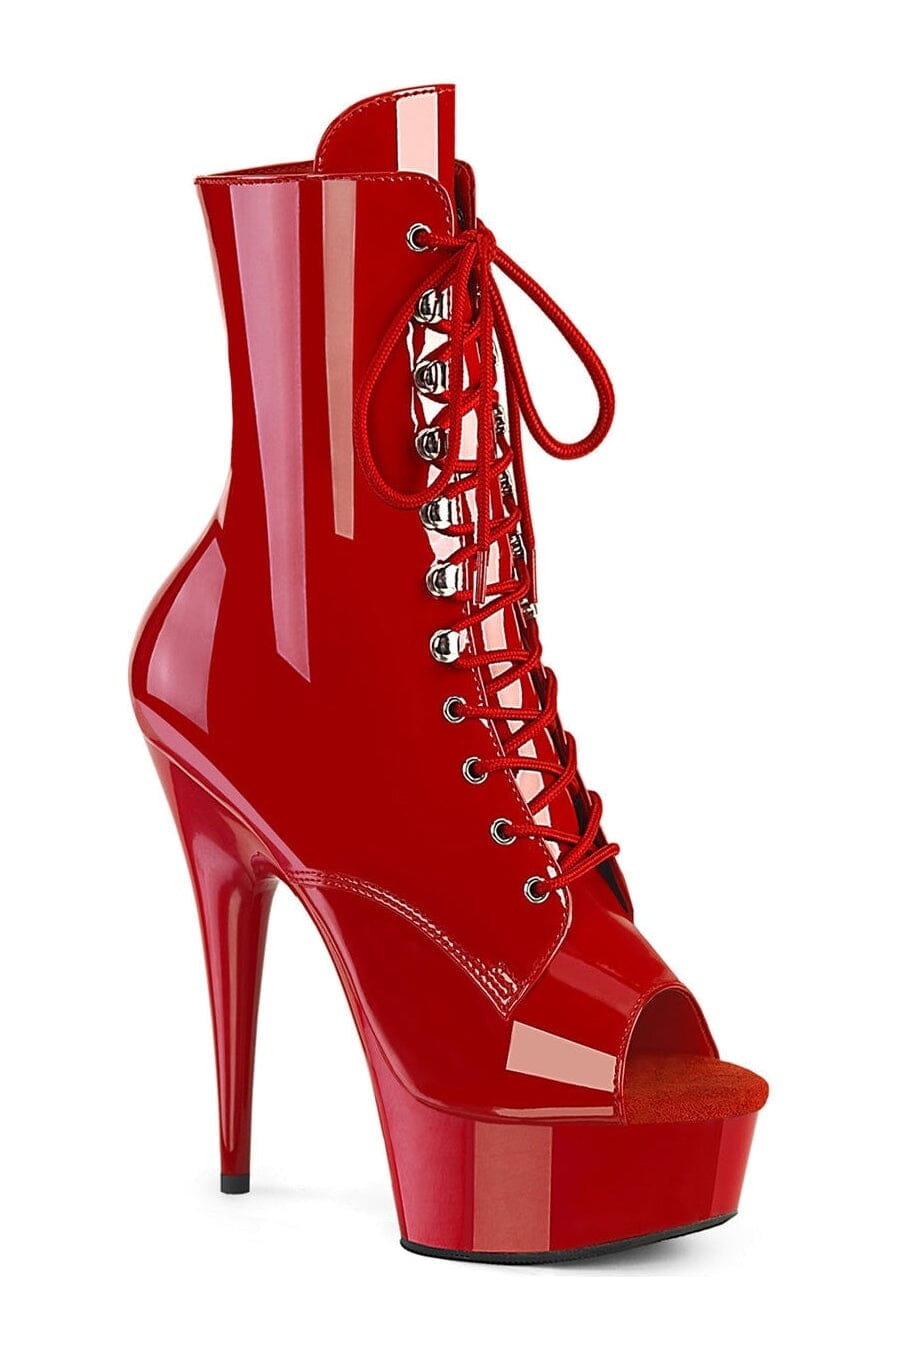 DELIGHT-1021 Red Patent Ankle Boot-Ankle Boots-Pleaser-Red-10-Patent-SEXYSHOES.COM